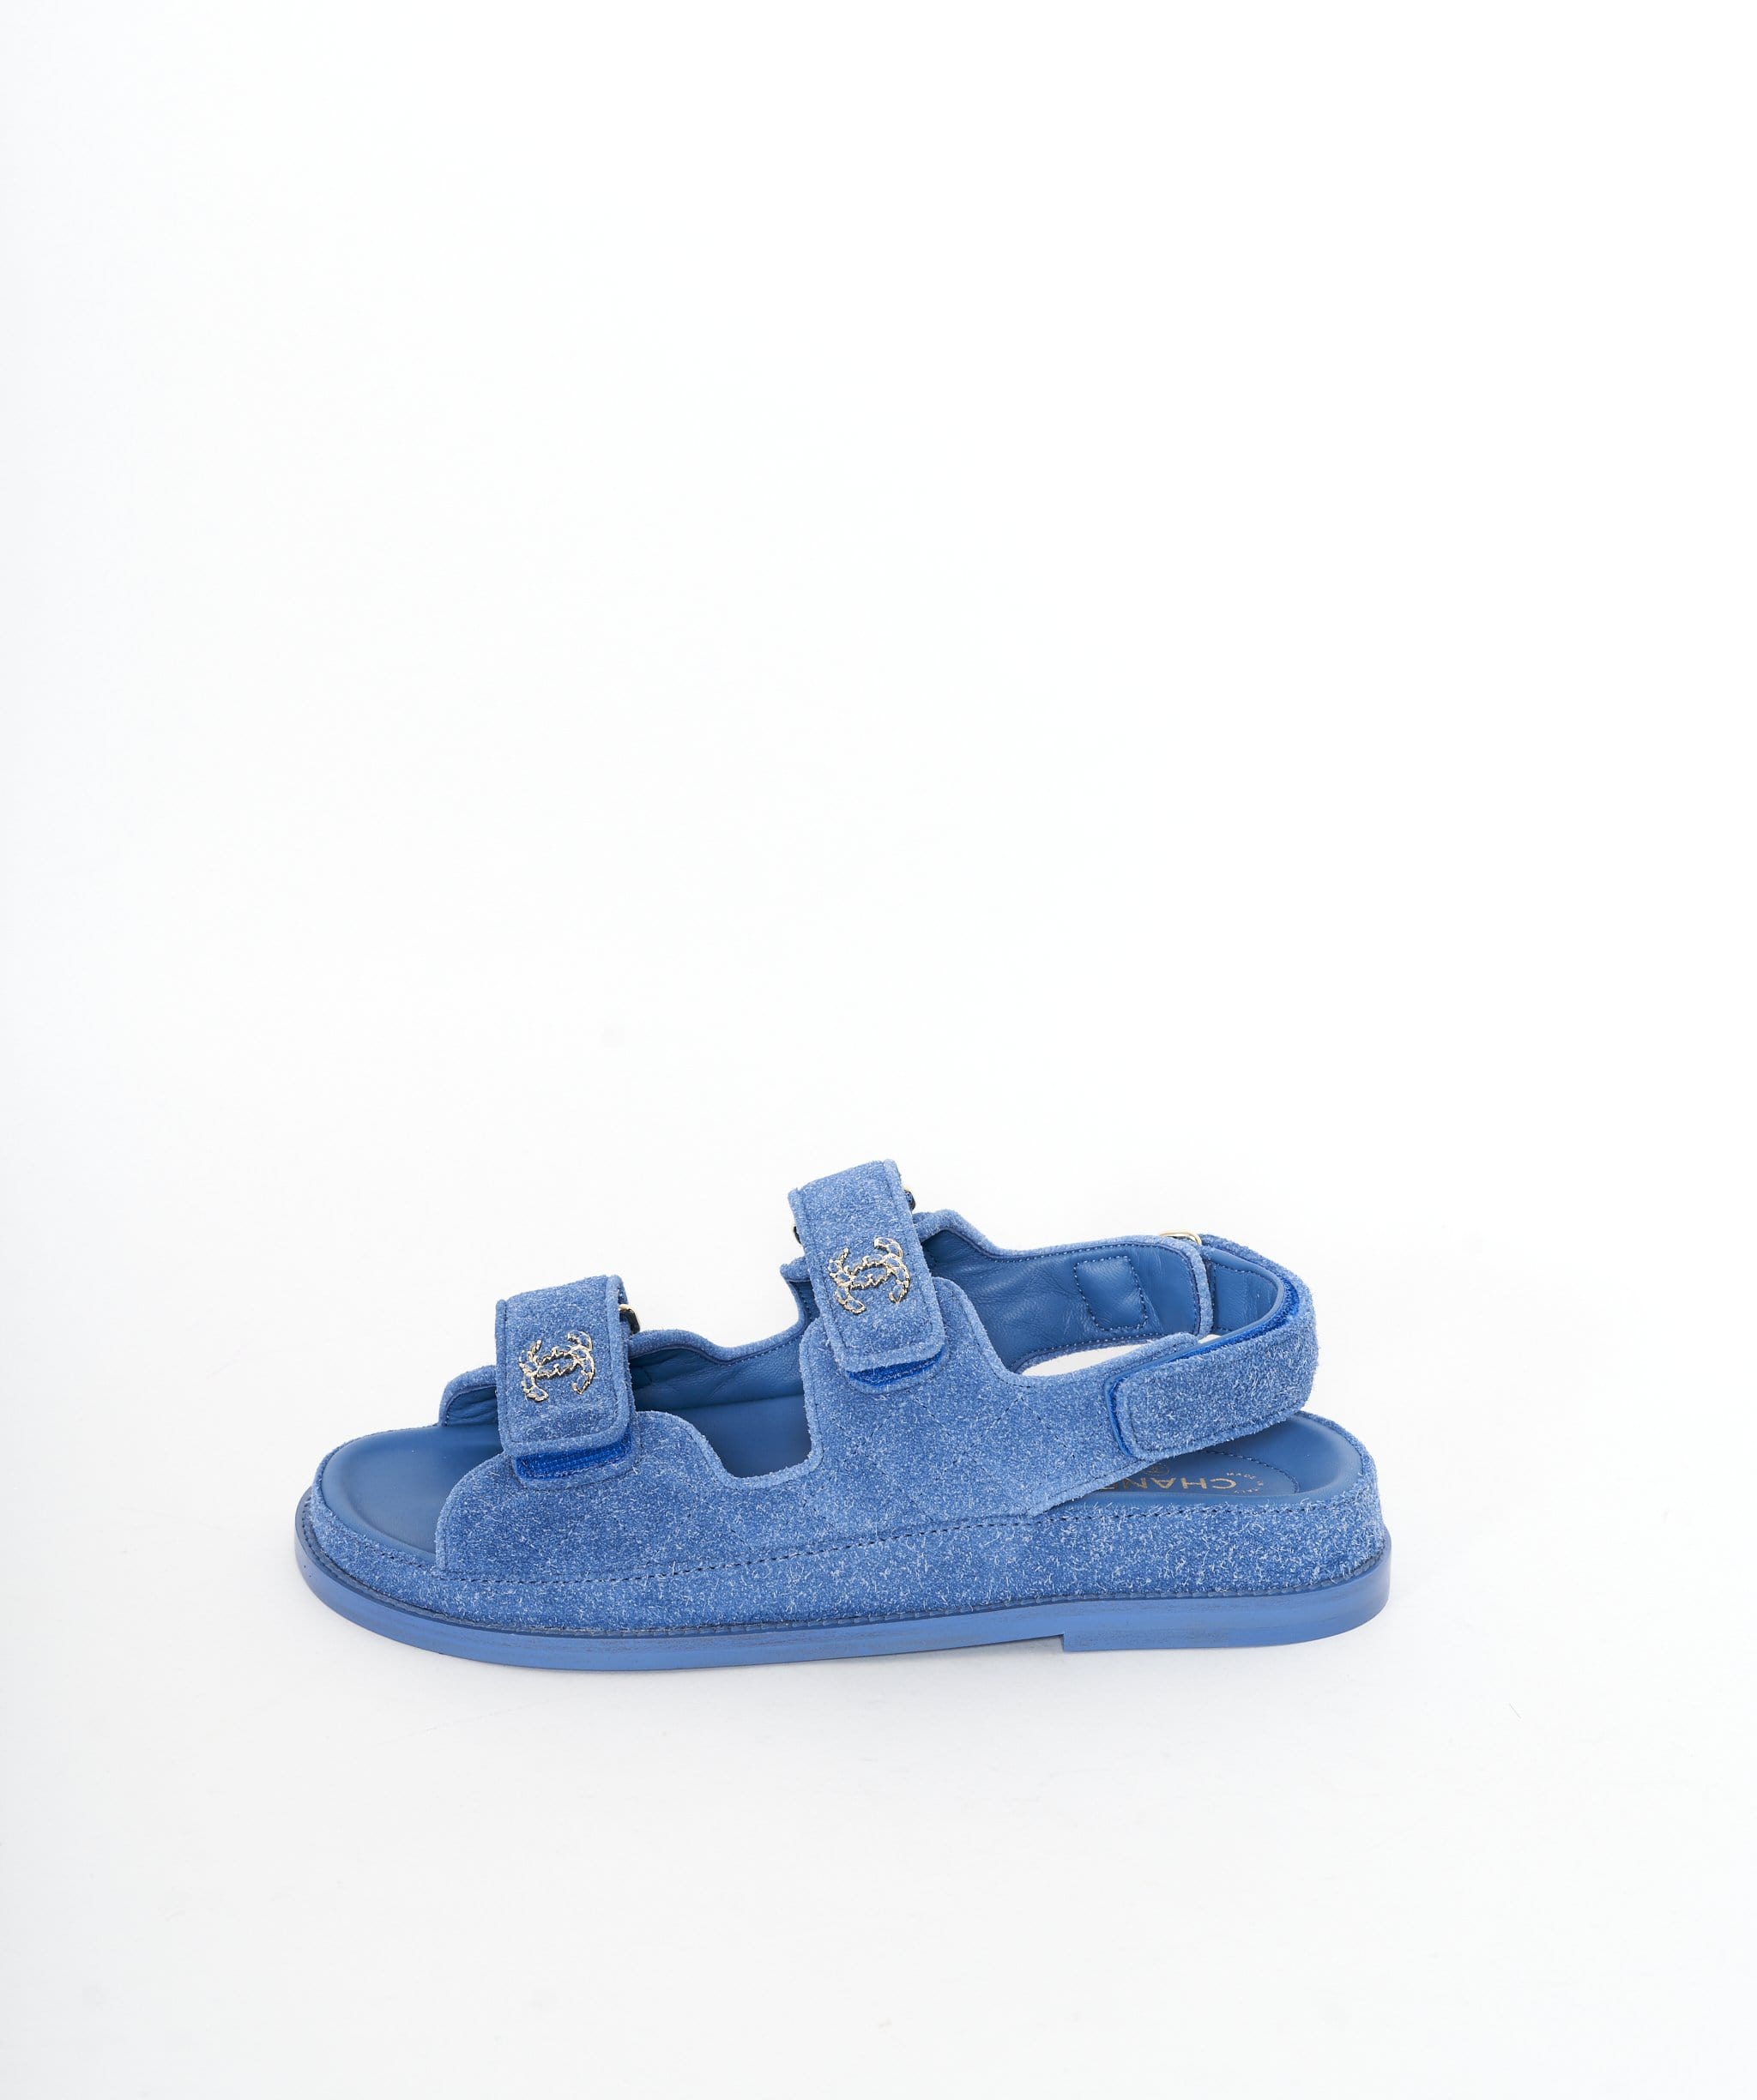 Dad sandals leather sandal Chanel Blue size 38 EU in Leather - 36389298